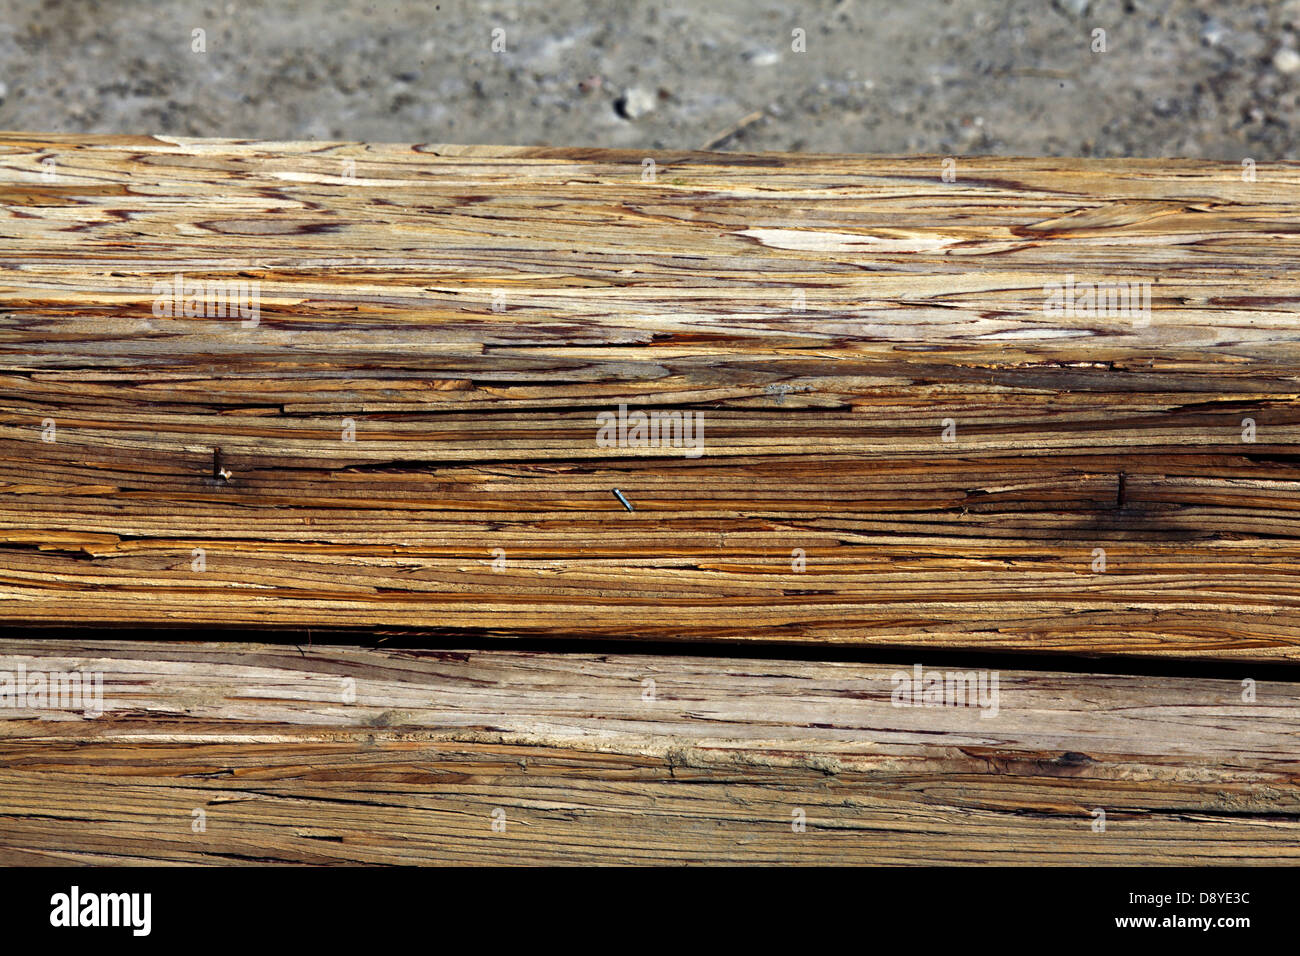 Composite wood beams, detail from side showing cross-section. Stock Photo